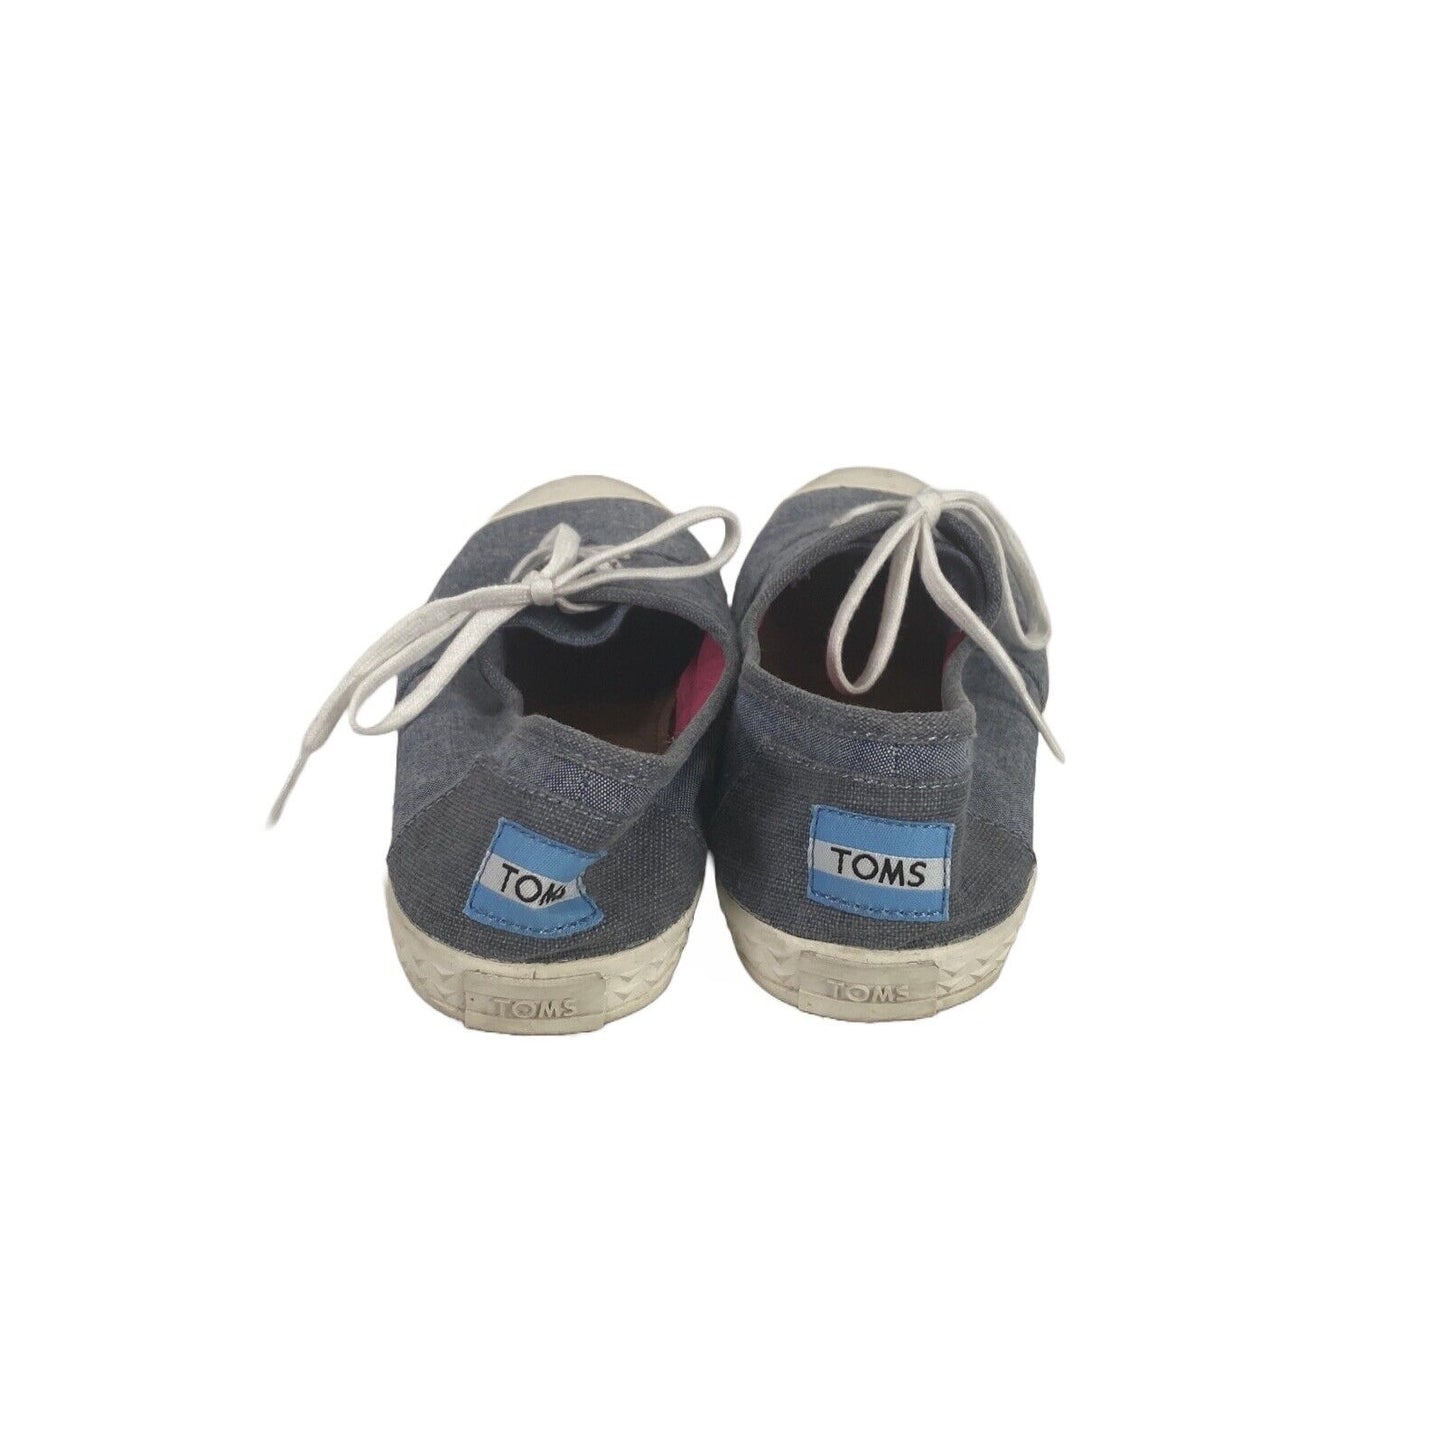 Toms Girls Youth Blue Fabric Zuma K Low Top Sneakers Shoes - 4